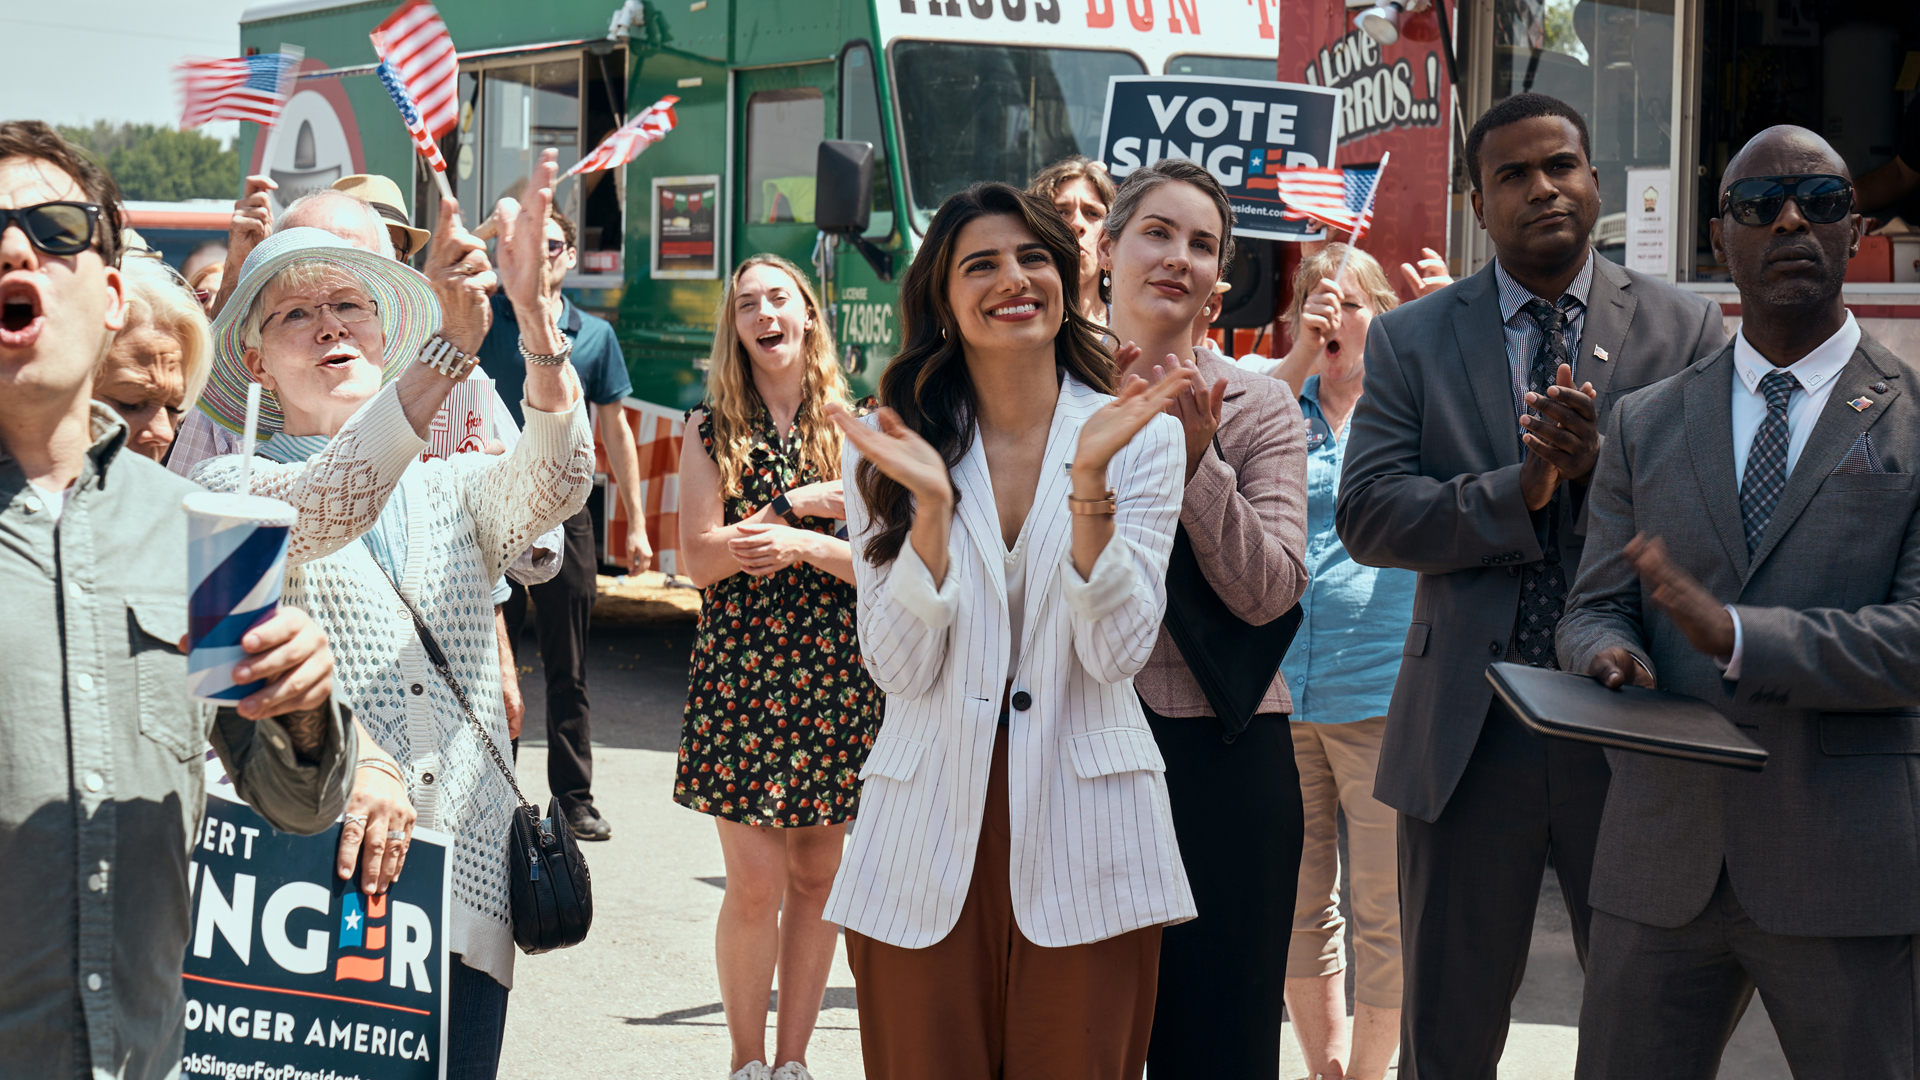 Victoria Neuman claps with the crowd on the campaign trail in The Boys season 3